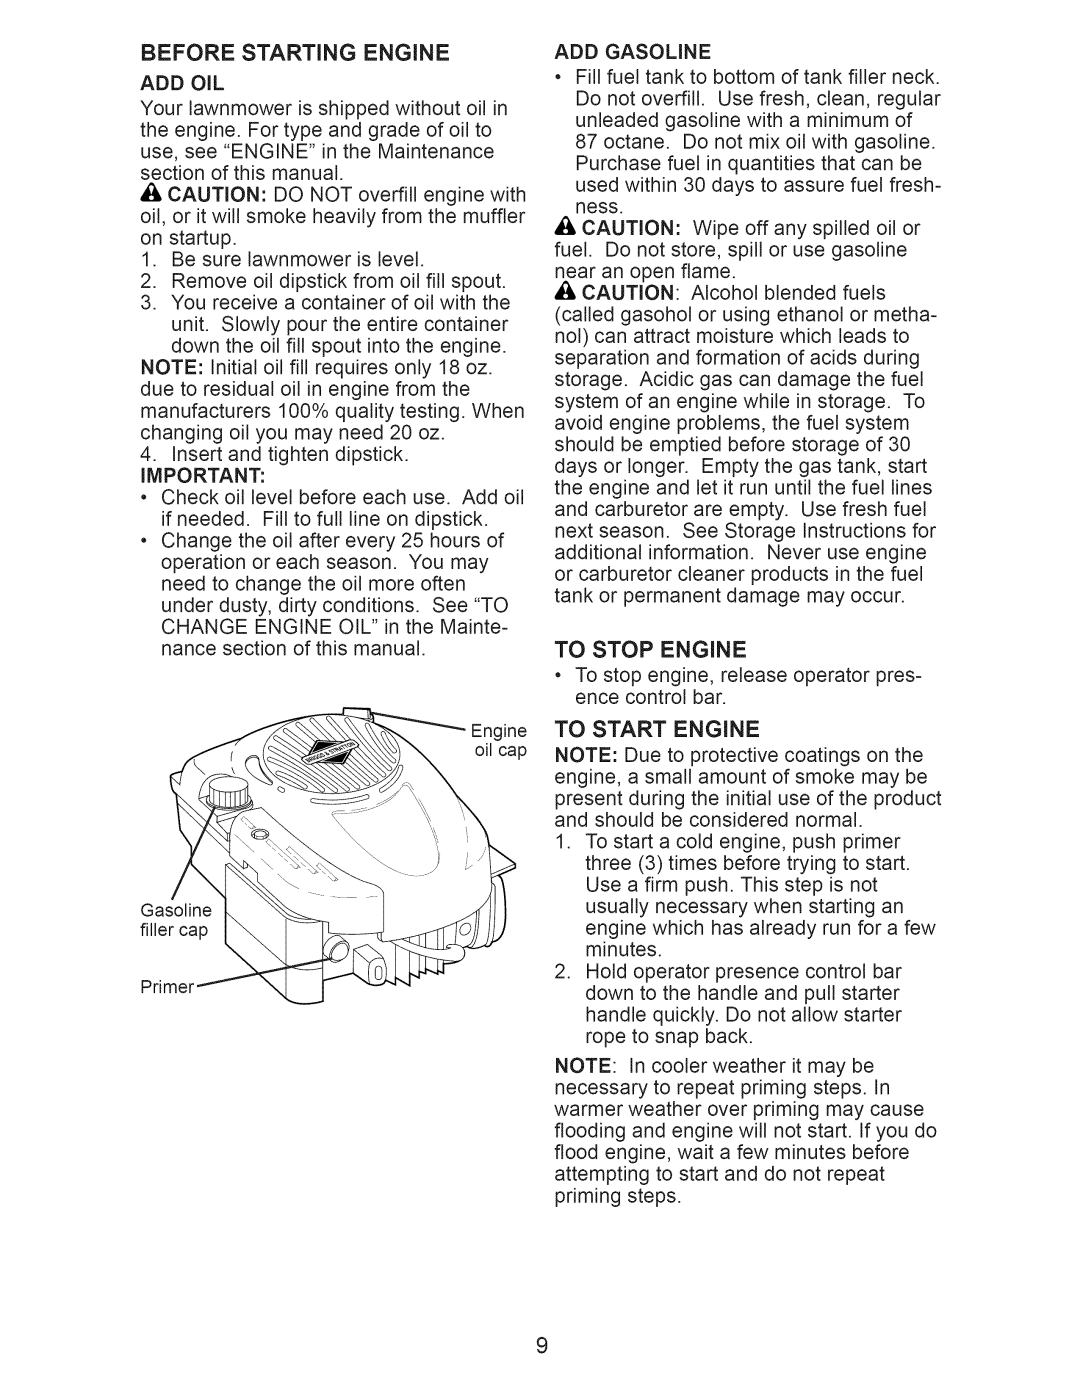 Craftsman 917.375012 owner manual Before Starting Engine, Add Oil, To Stop Engine, To Start Engine 